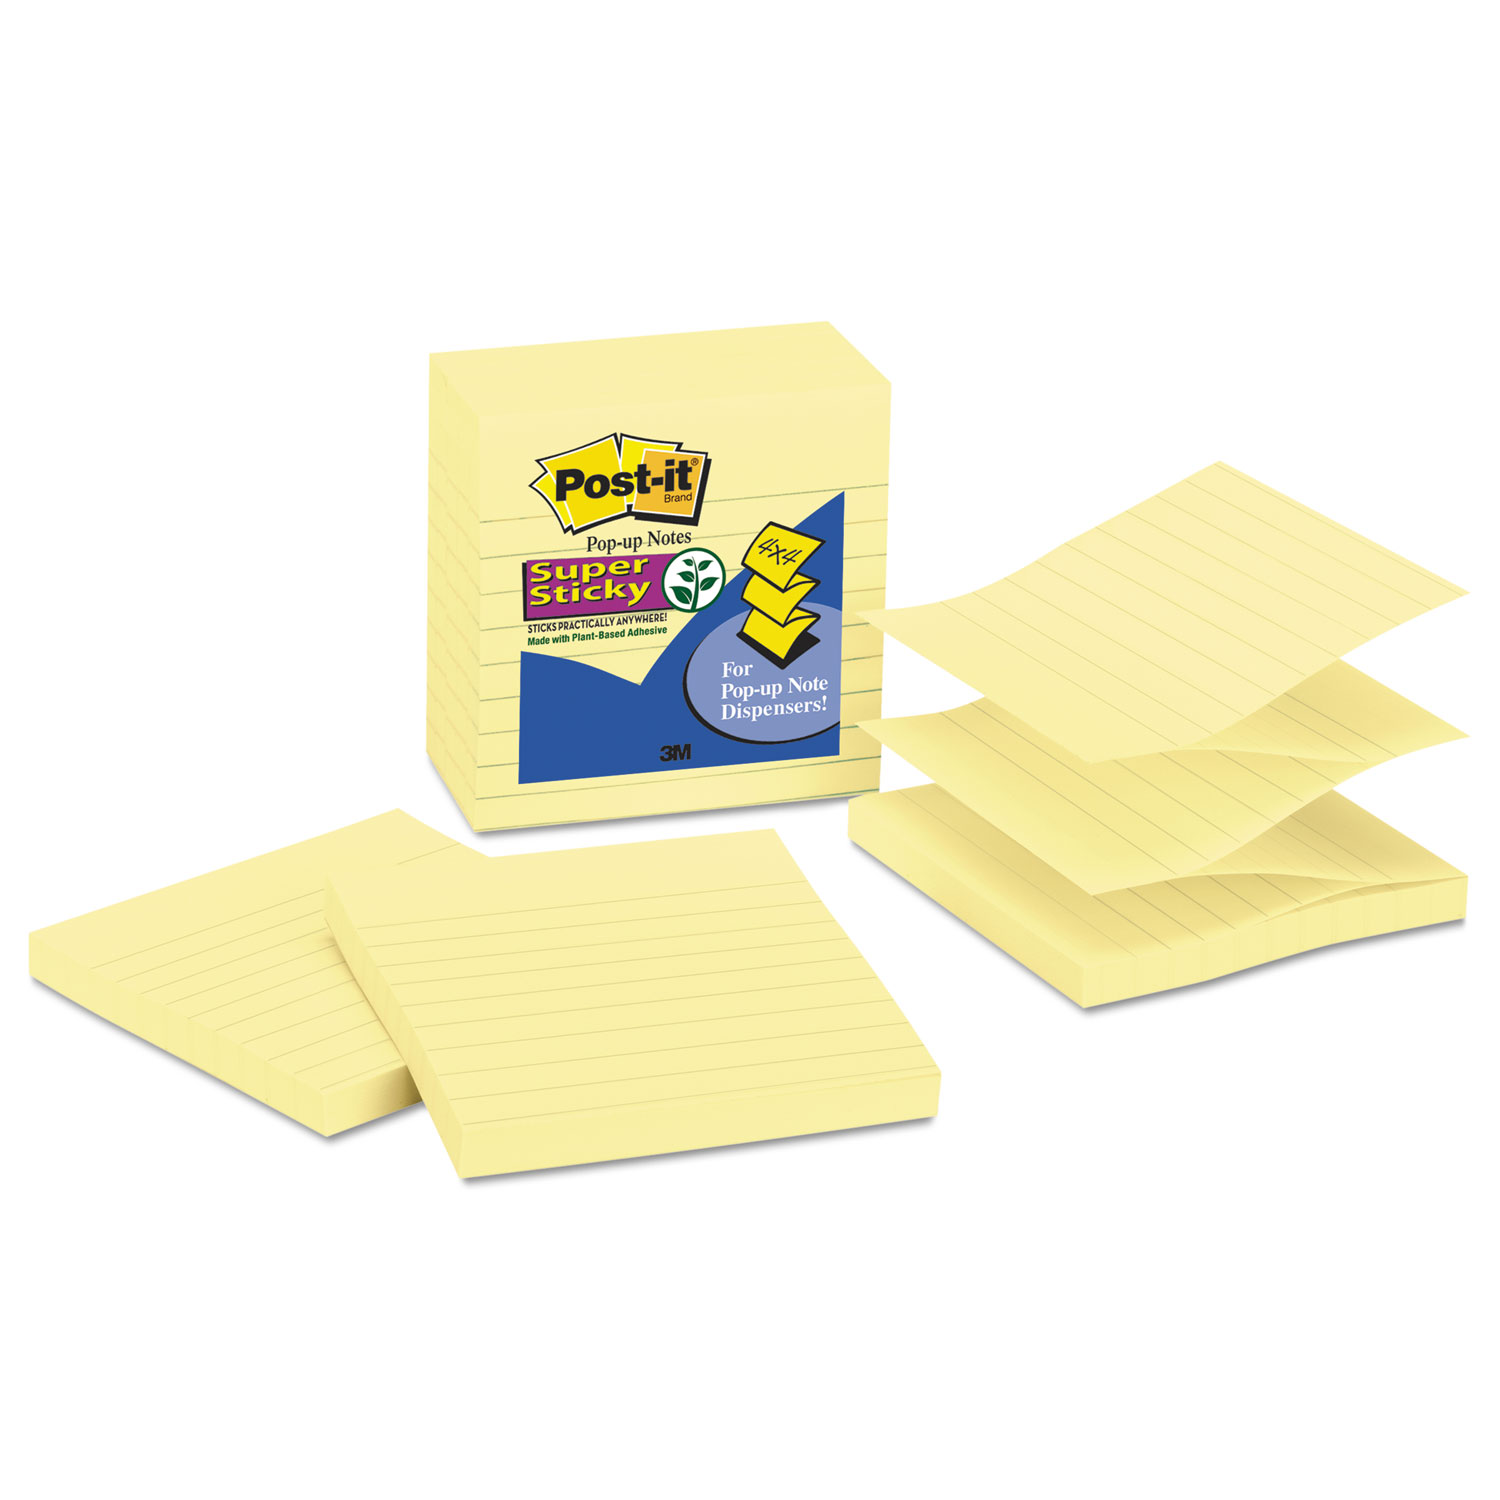 Pop-up Notes Refill, Lined, 4 x 4, Canary Yellow, 90-Sheet, 5/Pack